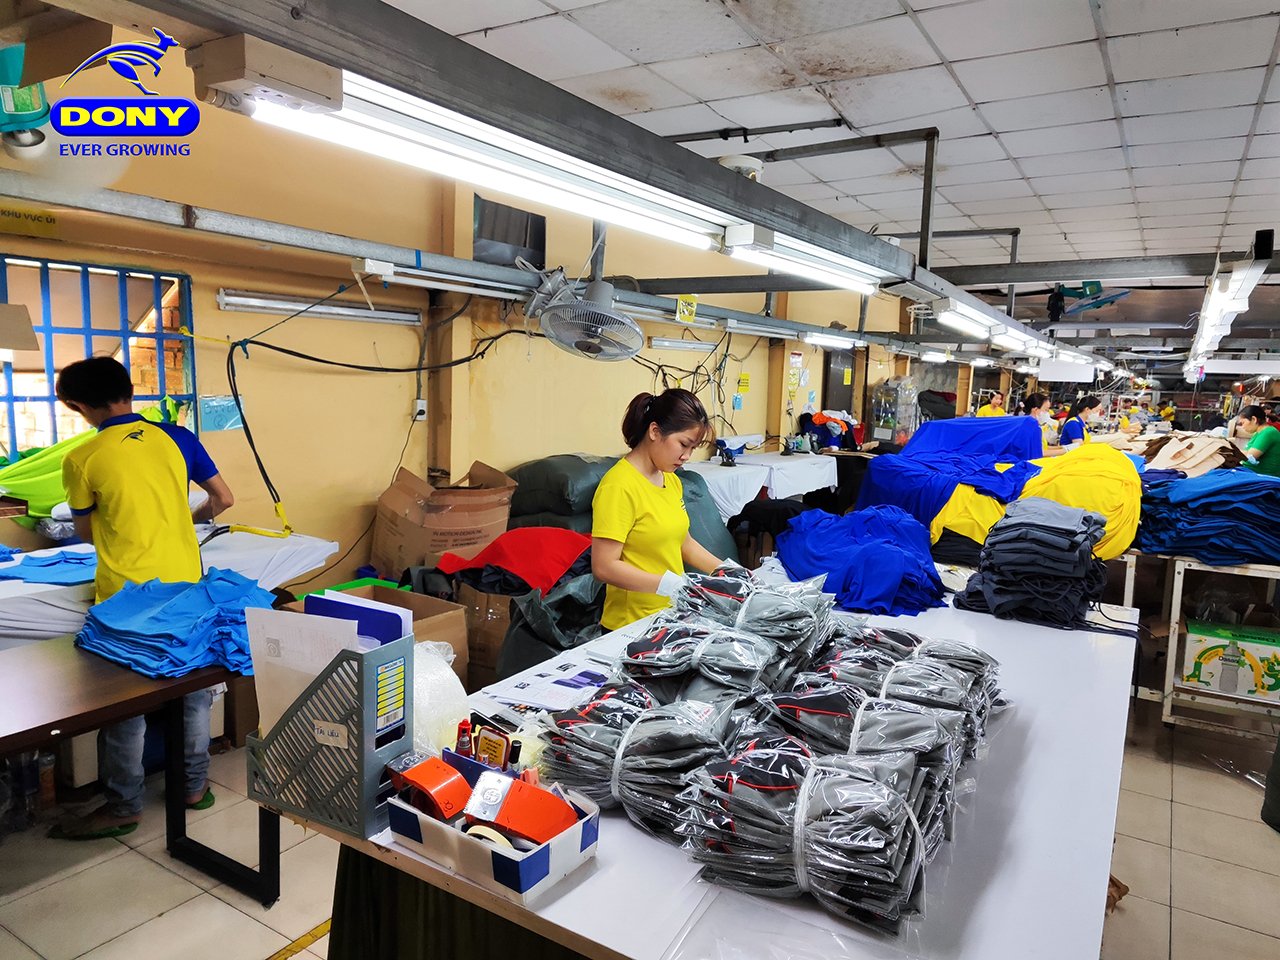 - Get The Opportunity To Manufacture Uniform Shirts For Elevator Group Branch In Vietnam